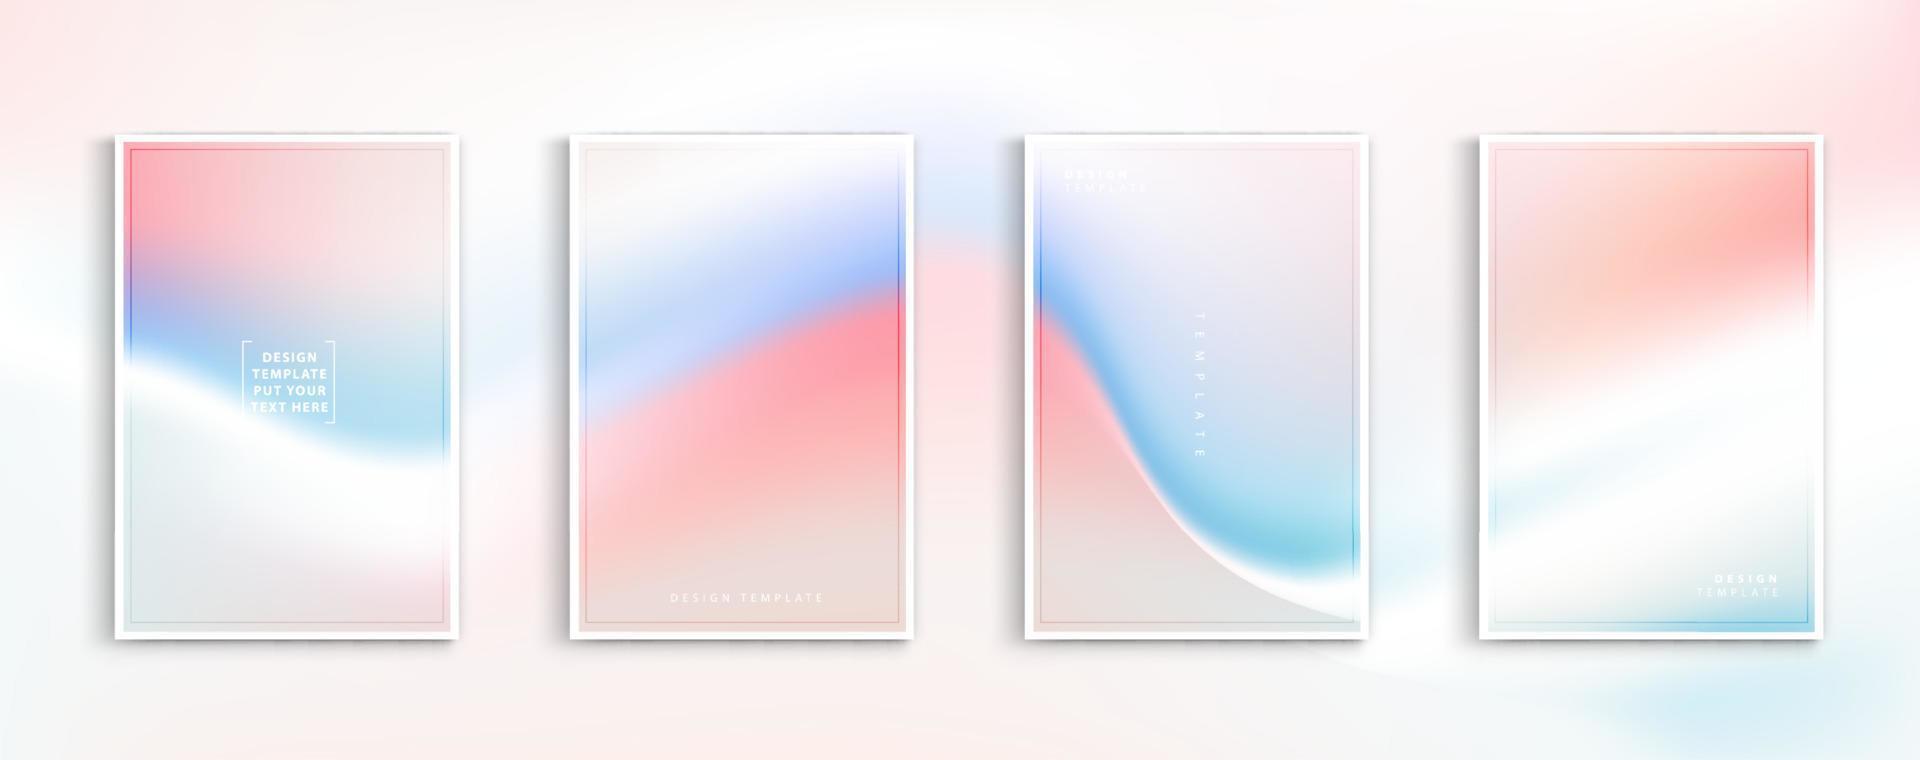 Pastel gradient backgrounds vector set. Soft tender pink, blue, purple and orange colours abstract background for app, web design, webpages, banners, greeting cards. Vector design.